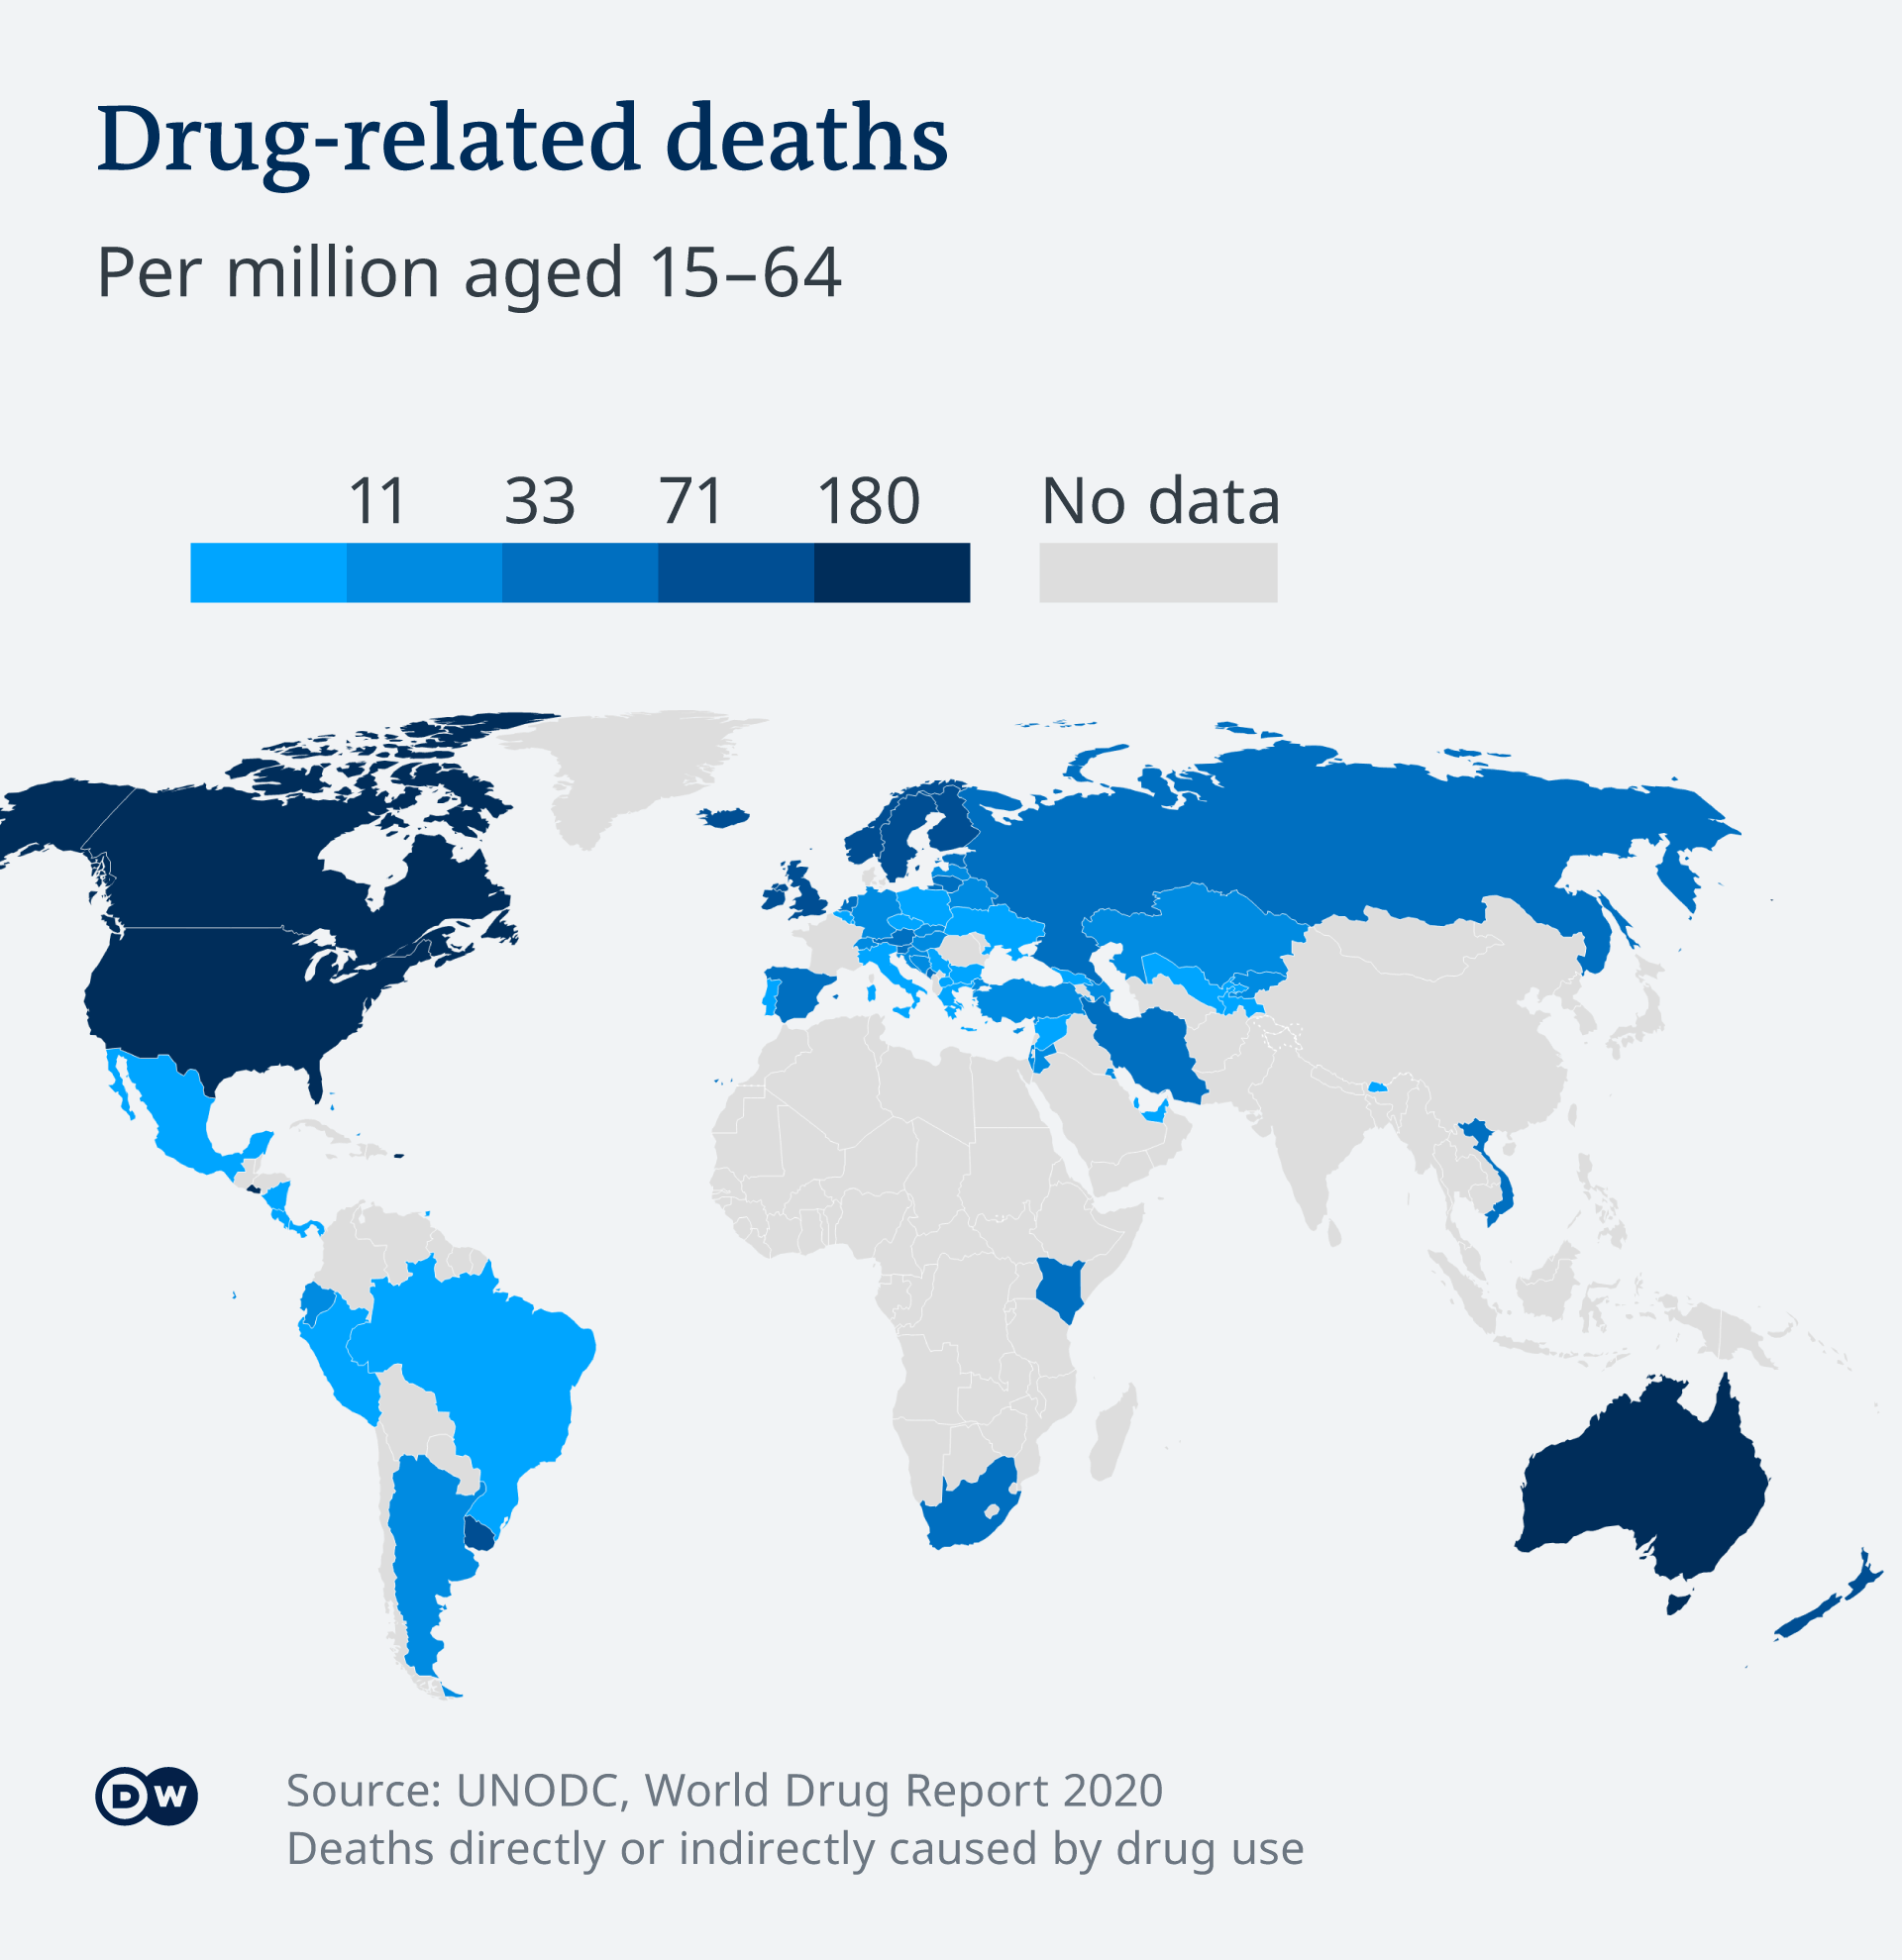 Map indicating drug-related deaths worldwide